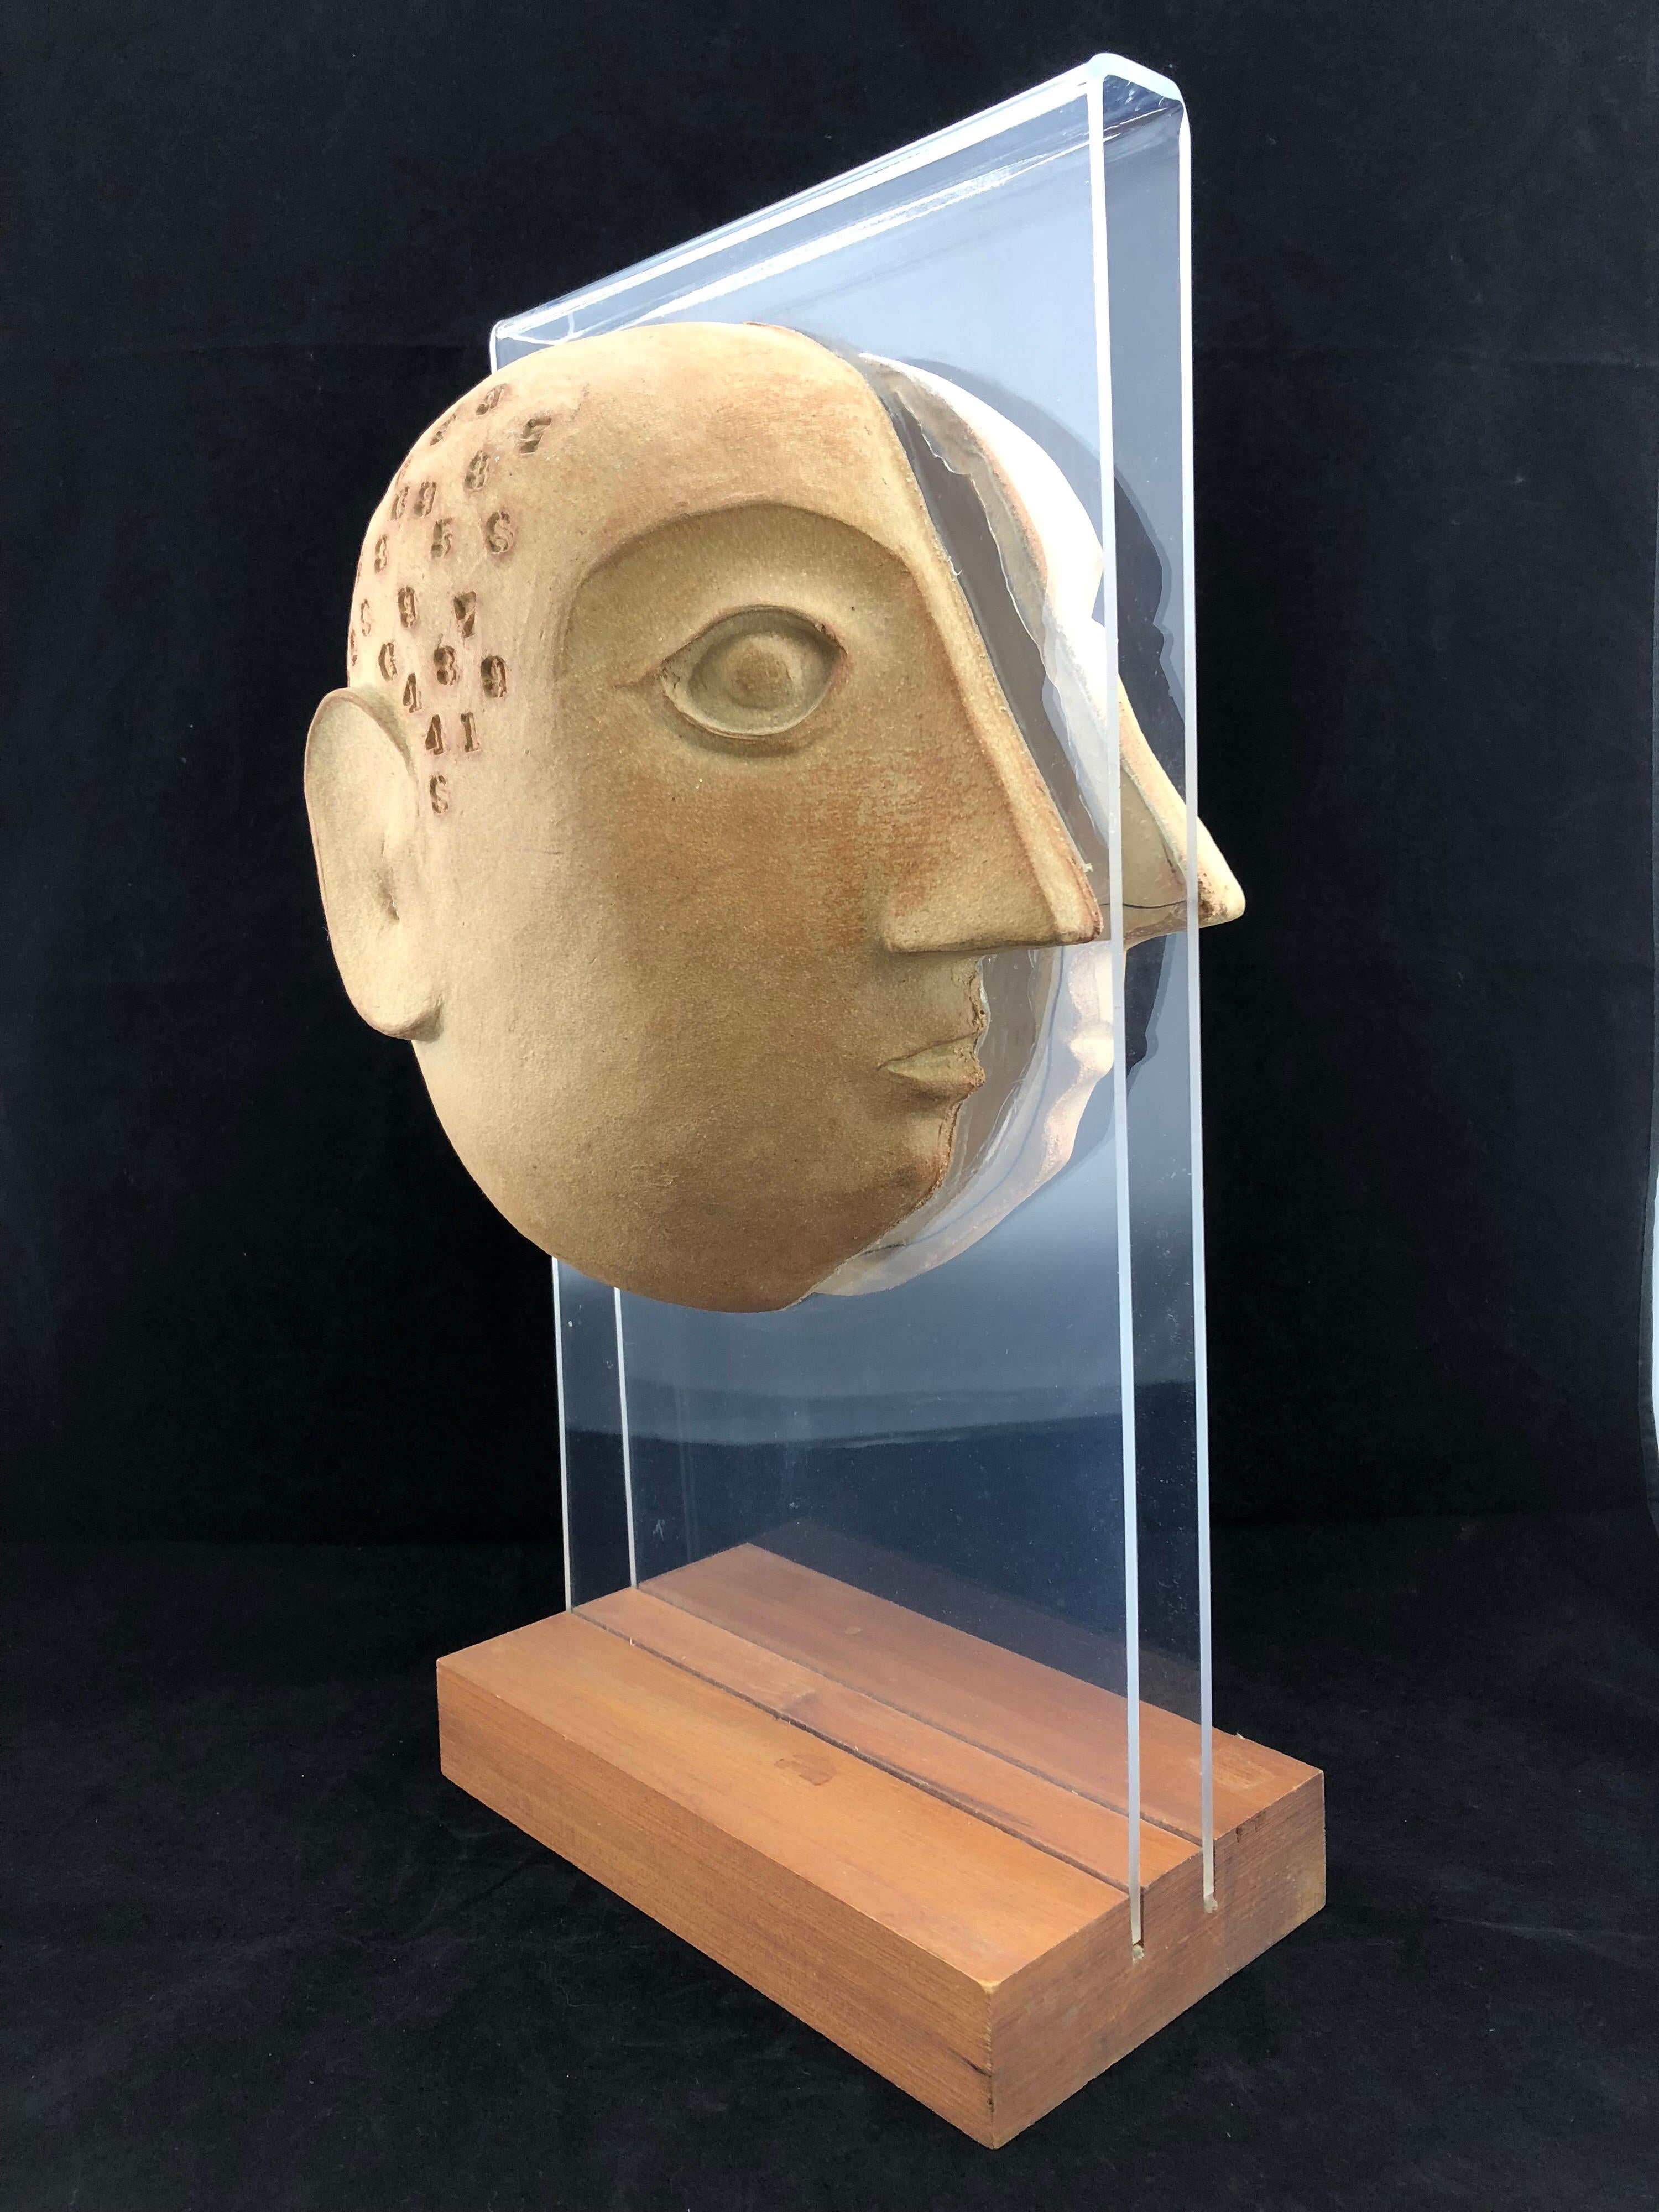 Midcentury acrylic and ceramic head sculpture by David Gil for Bennington. No known issues that would detract from value or aesthetics. Ready for use.